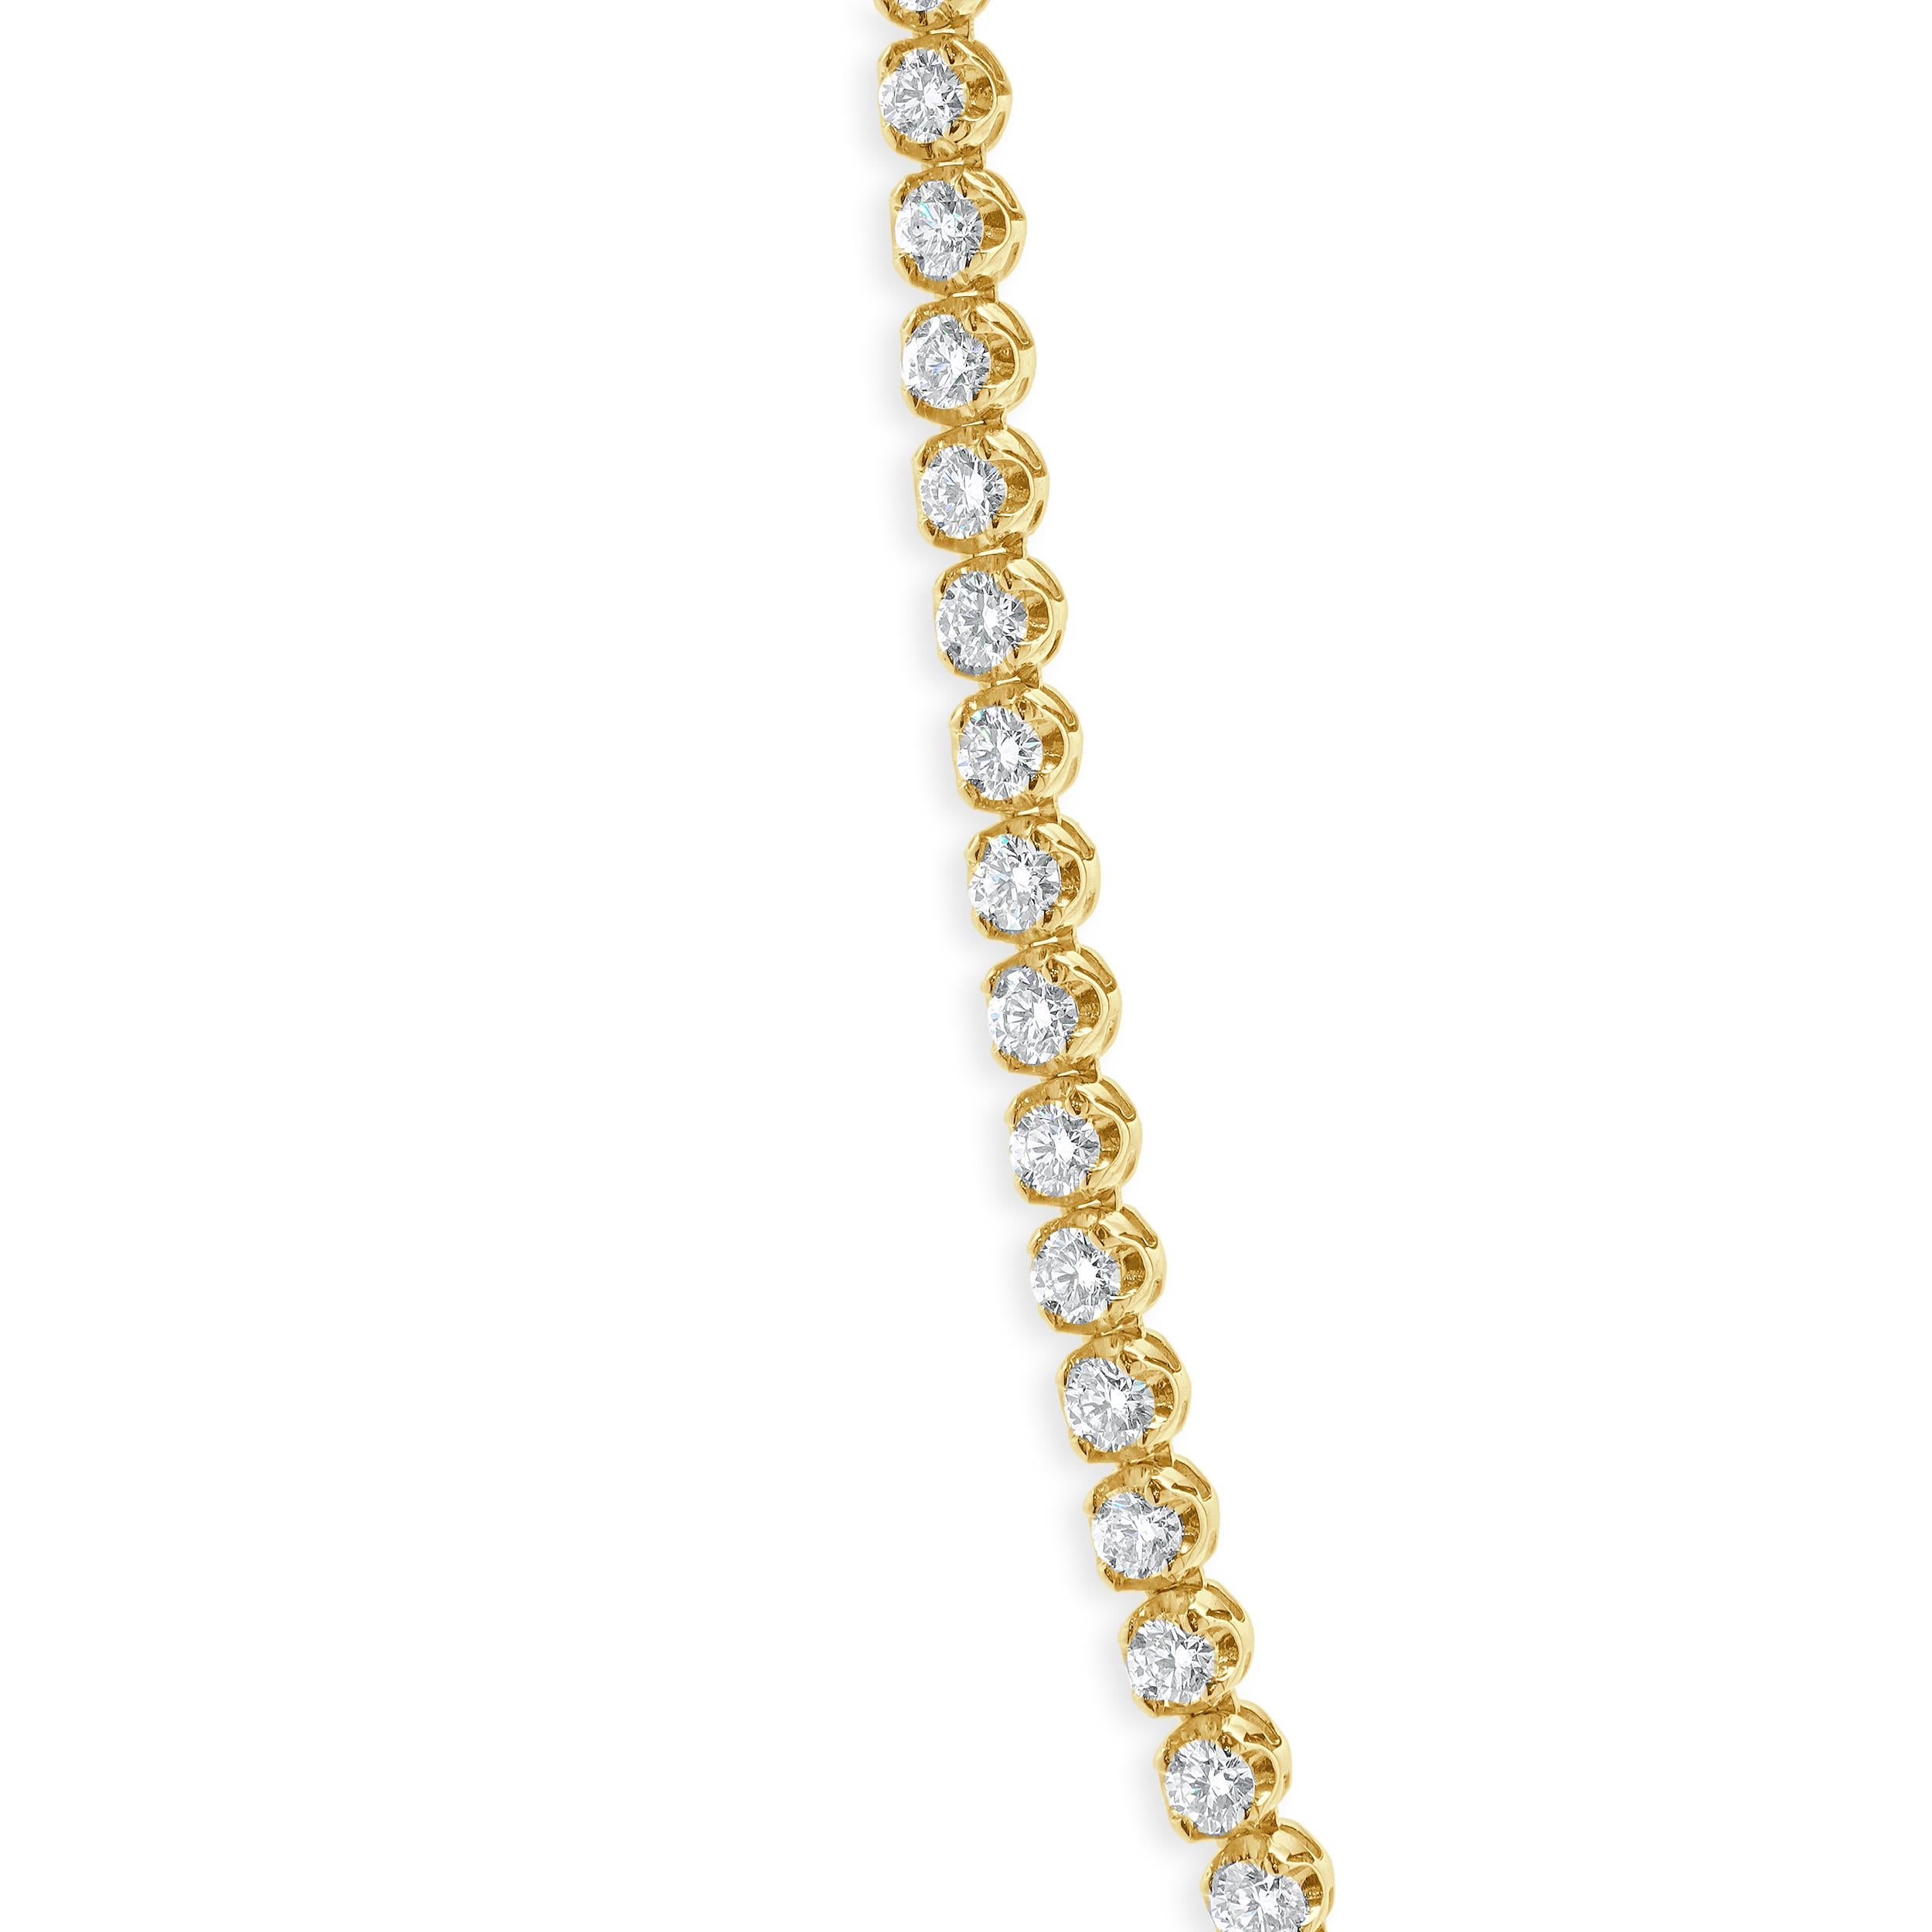 Designer: custom
Material: 14K yellow gold
Diamonds: 84 round brilliant Diamond = 16.37cttw
Color: G
Clarity:VS- SI1
Dimensions: necklace measures 16.5-inches in length 
Weight: 36.36 grams